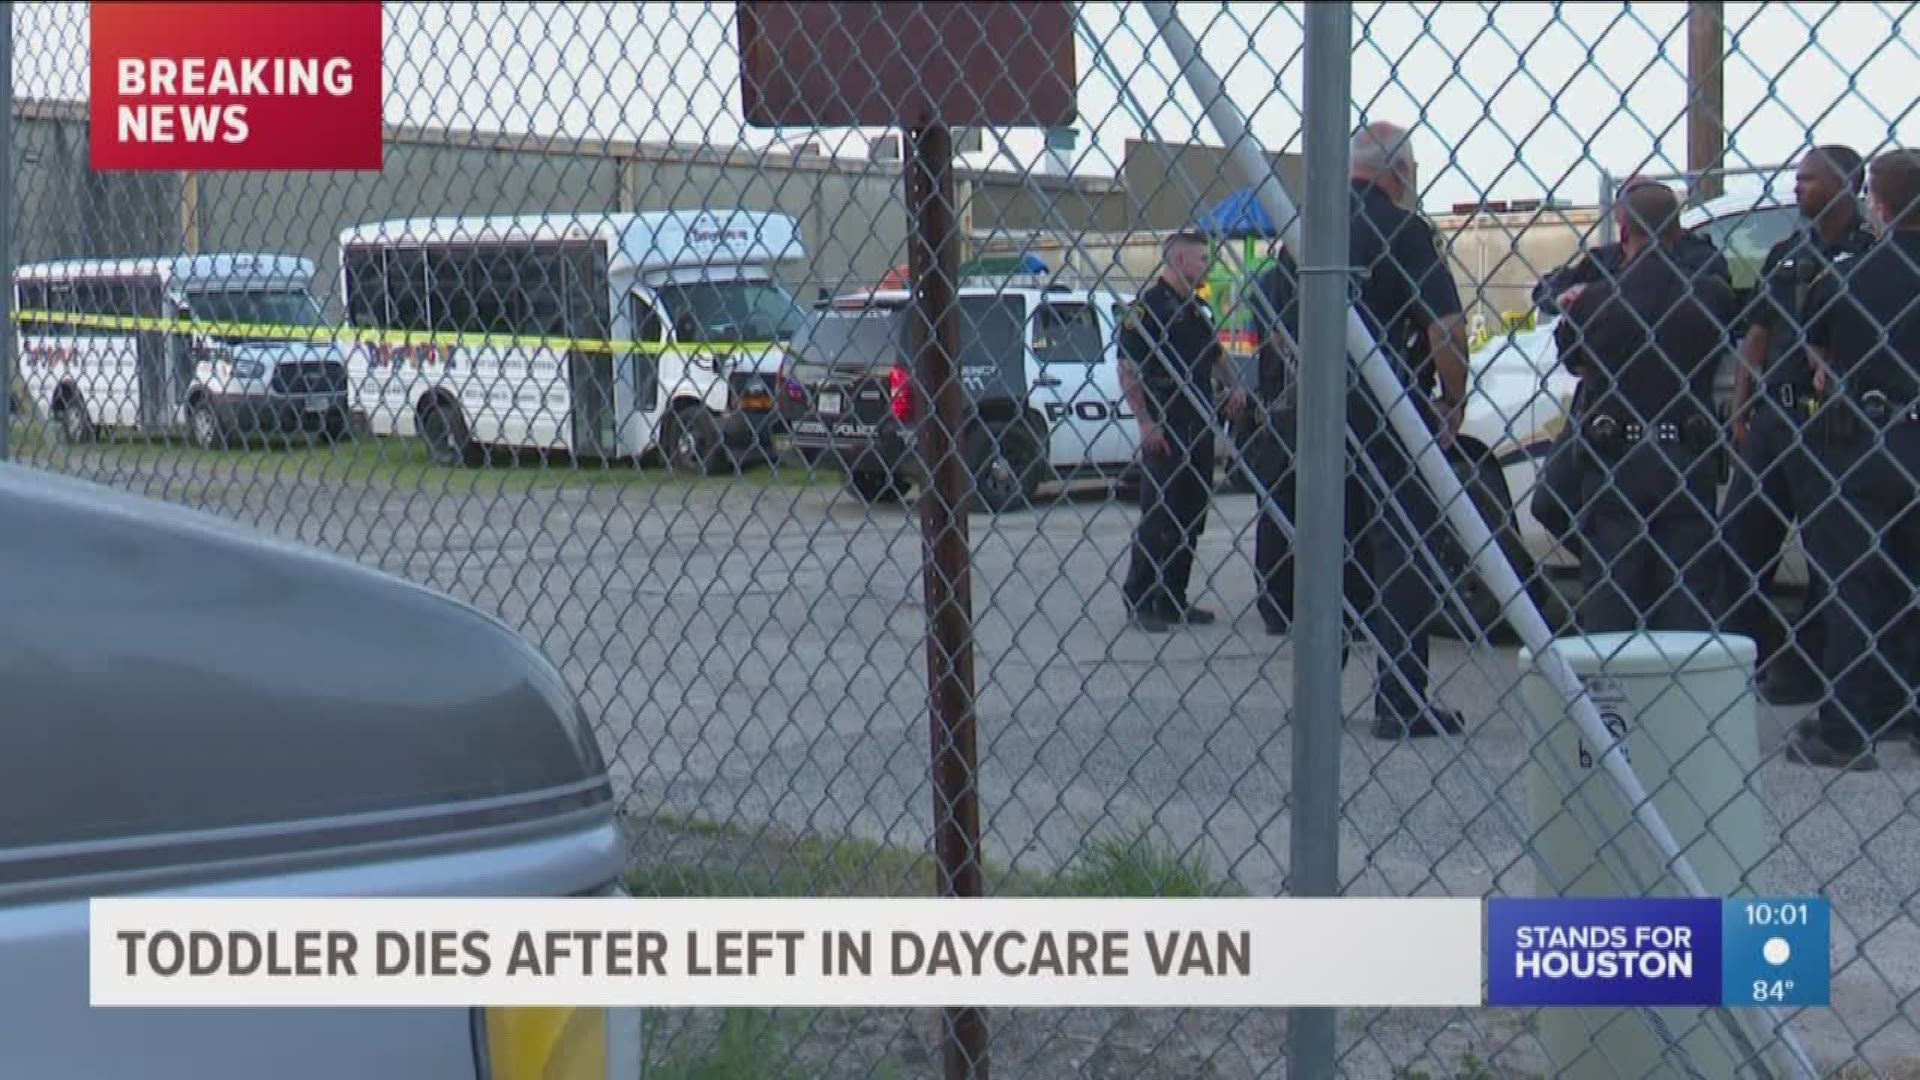 Authorities say a 3-year-old boy has died after being left in a hot van Thursday evening in northwest Houston.